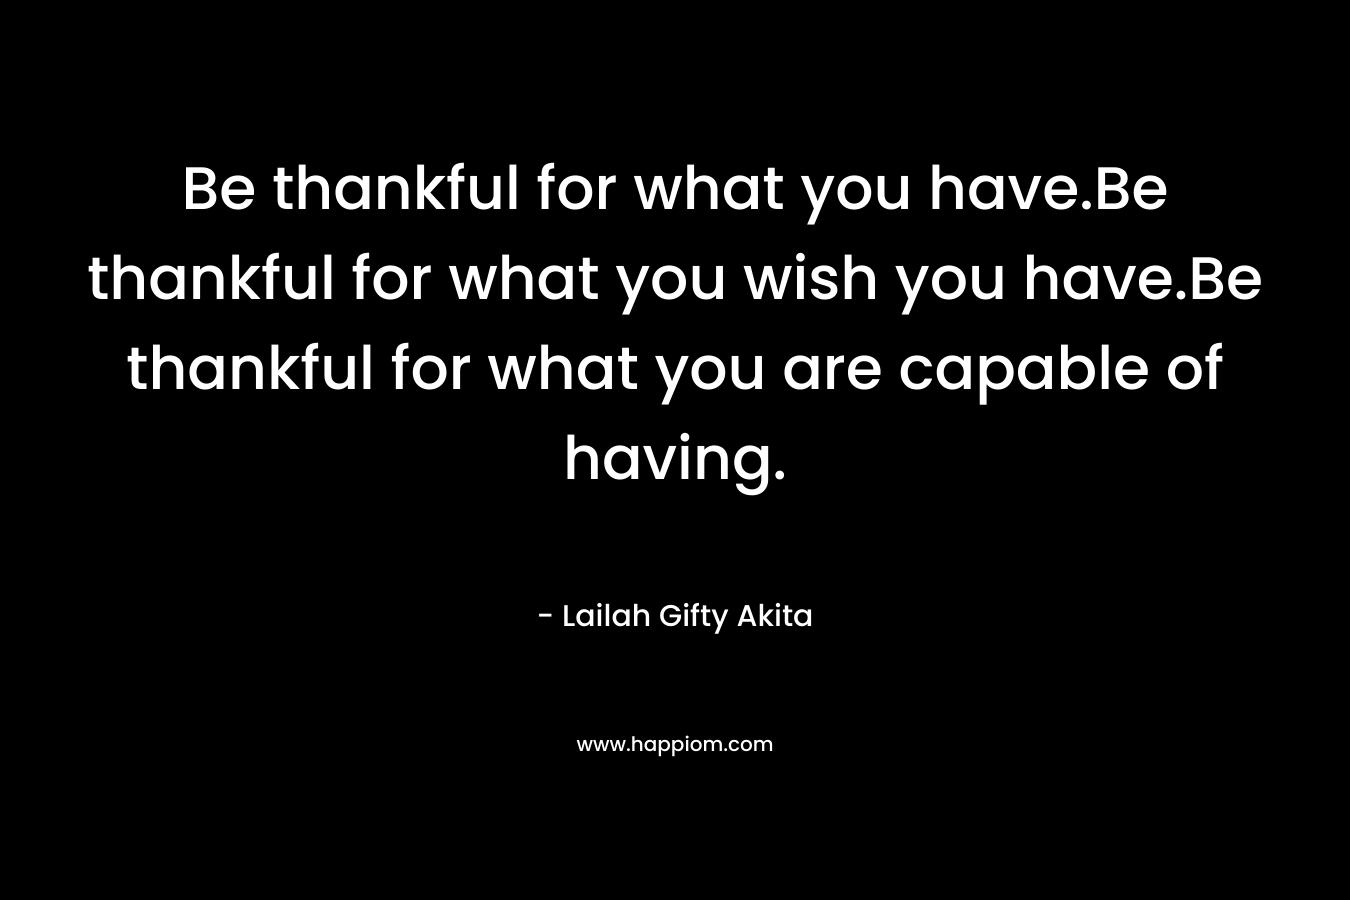 Be thankful for what you have.Be thankful for what you wish you have.Be thankful for what you are capable of having. – Lailah Gifty Akita